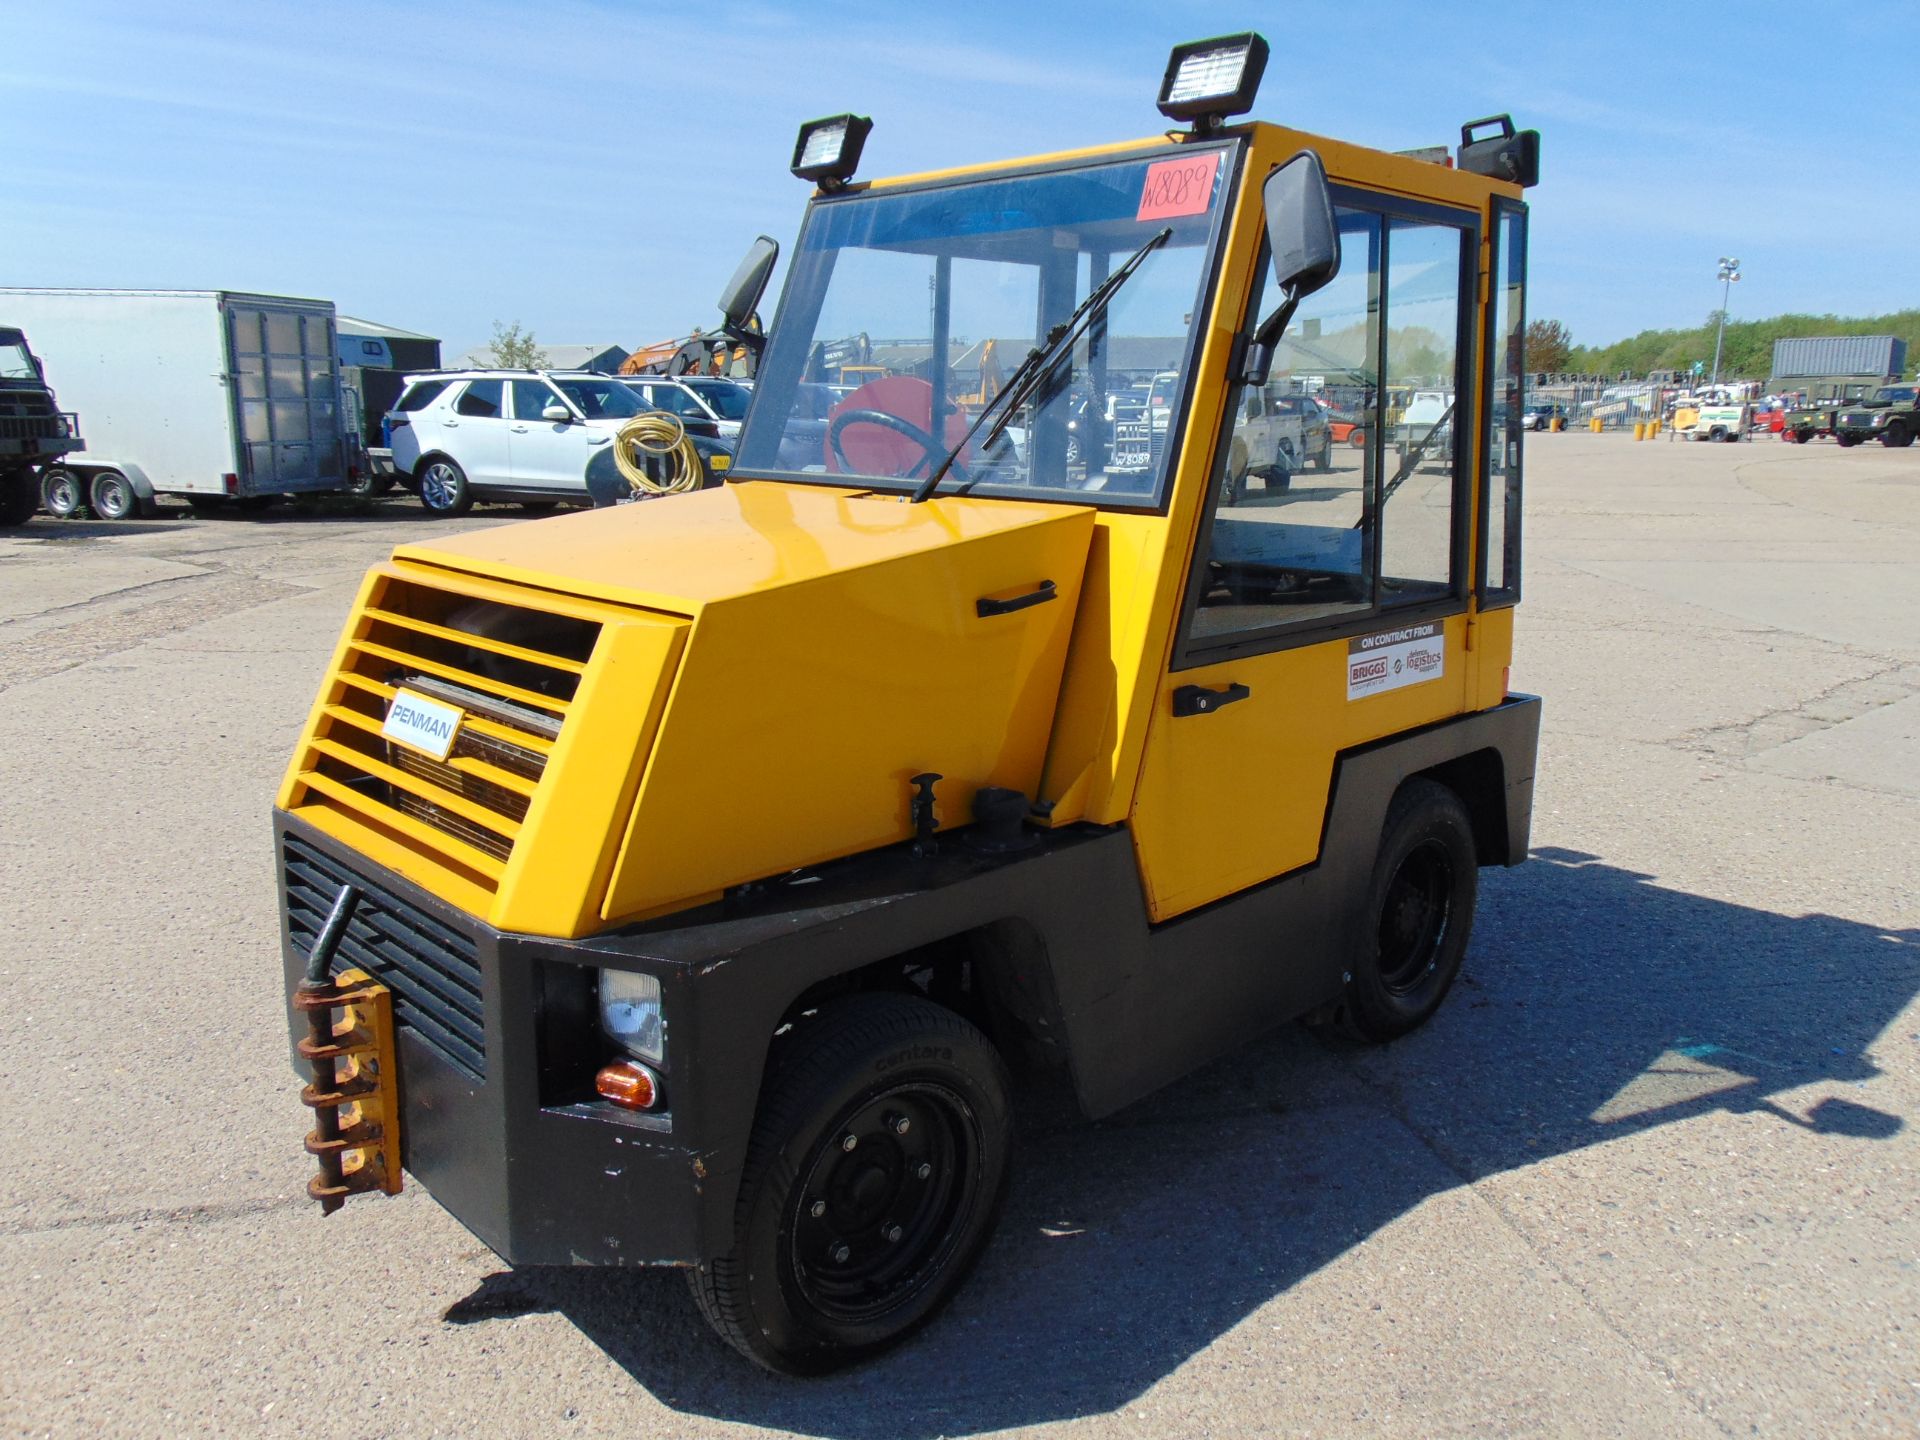 Penman 40 Industrial Aircraft - Airport Diesel Tug/Towing Tractor ONLY 1,463 HOURS! - Image 3 of 20